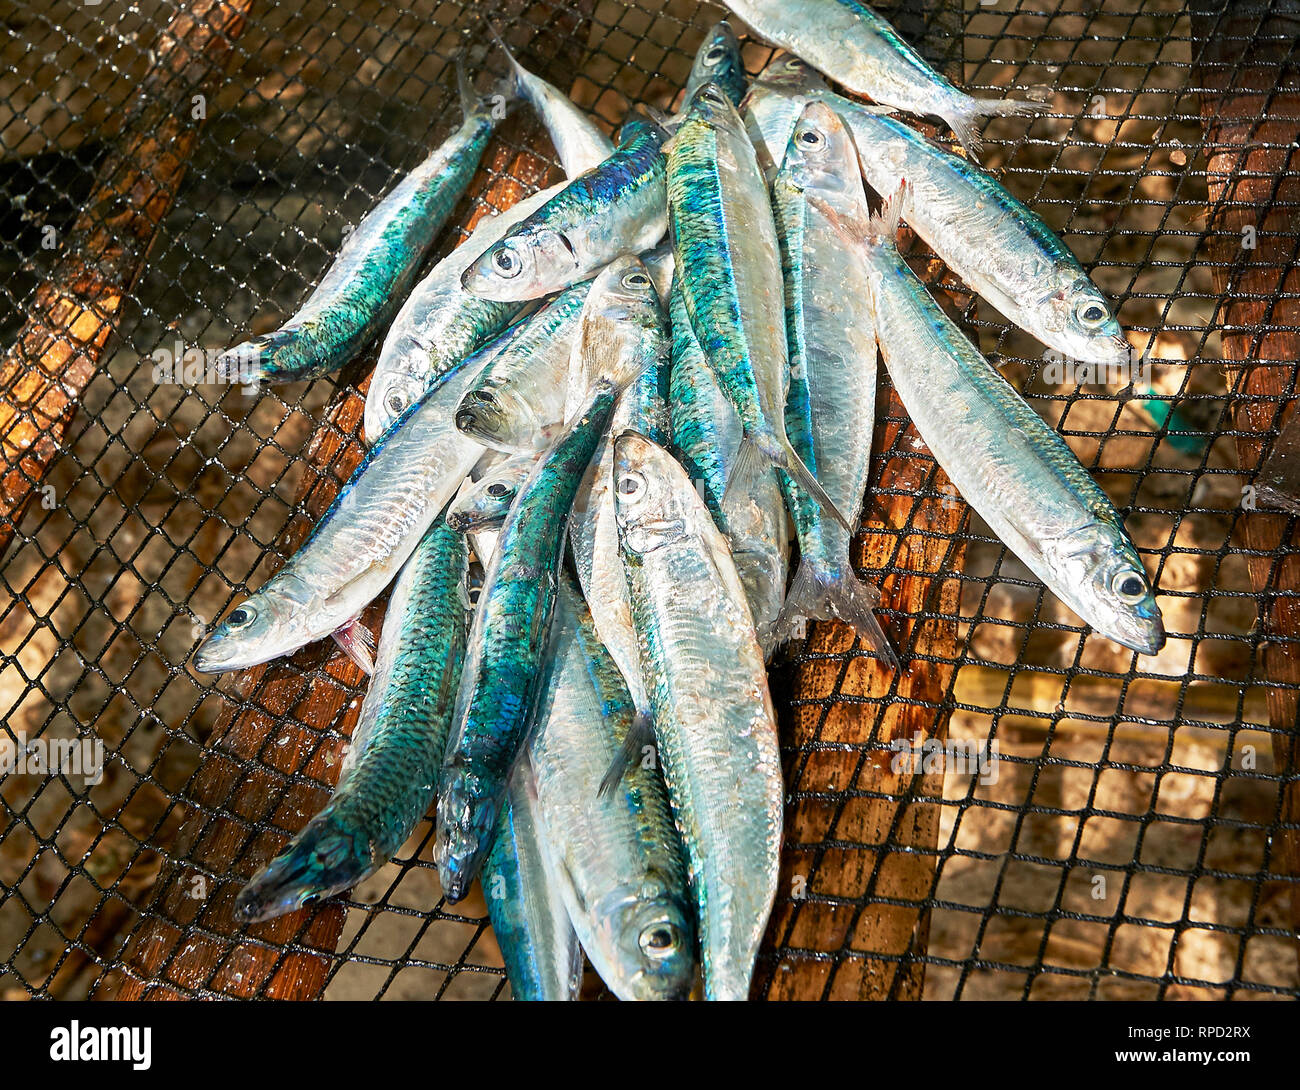 Catch of small blue and silver herring-like fish in a fishing net for sale at Hinolugan Beach on Carabao Island, Romblon Province, Philippines Stock Photo